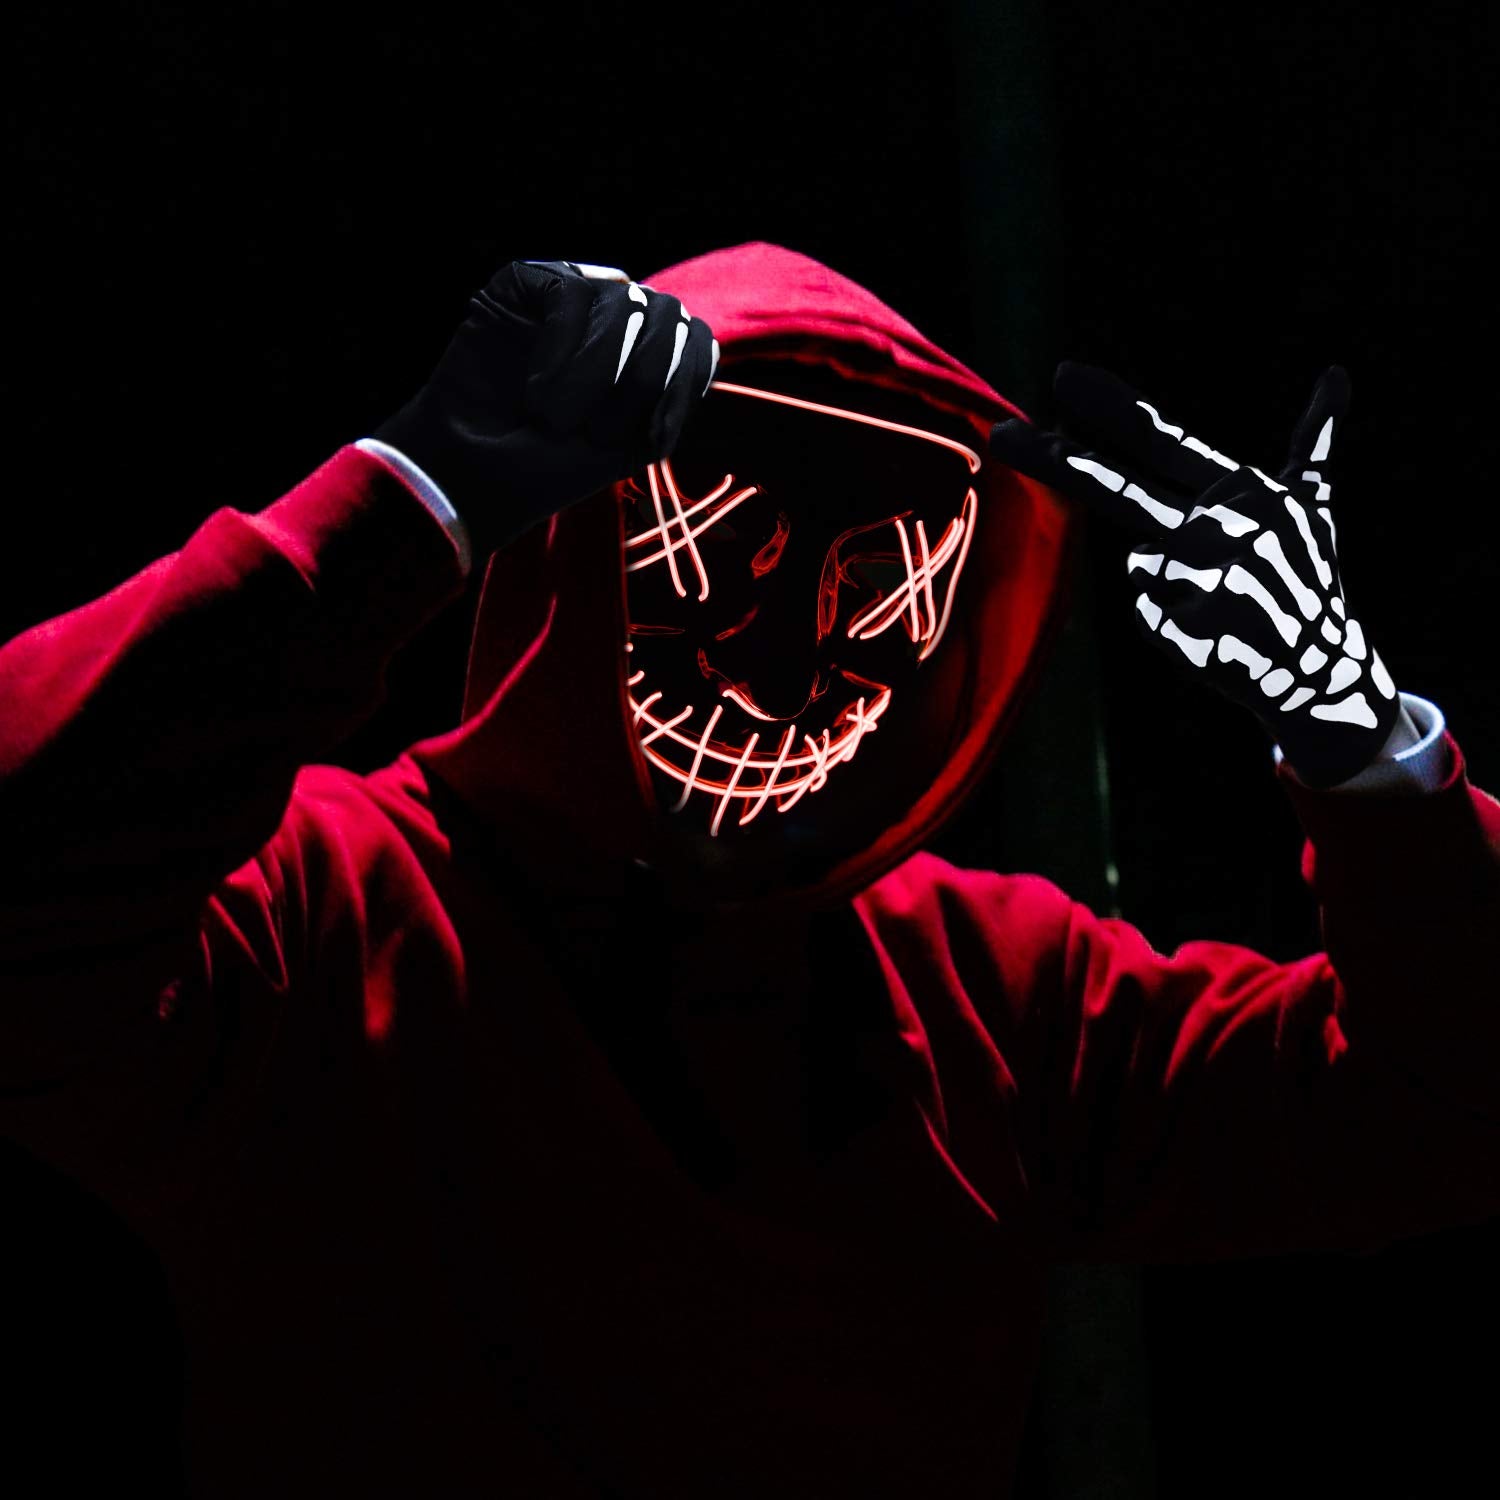 Halloween Mask LED EL Wire Light Up Mask for Festival Cosplay Halloween Costume